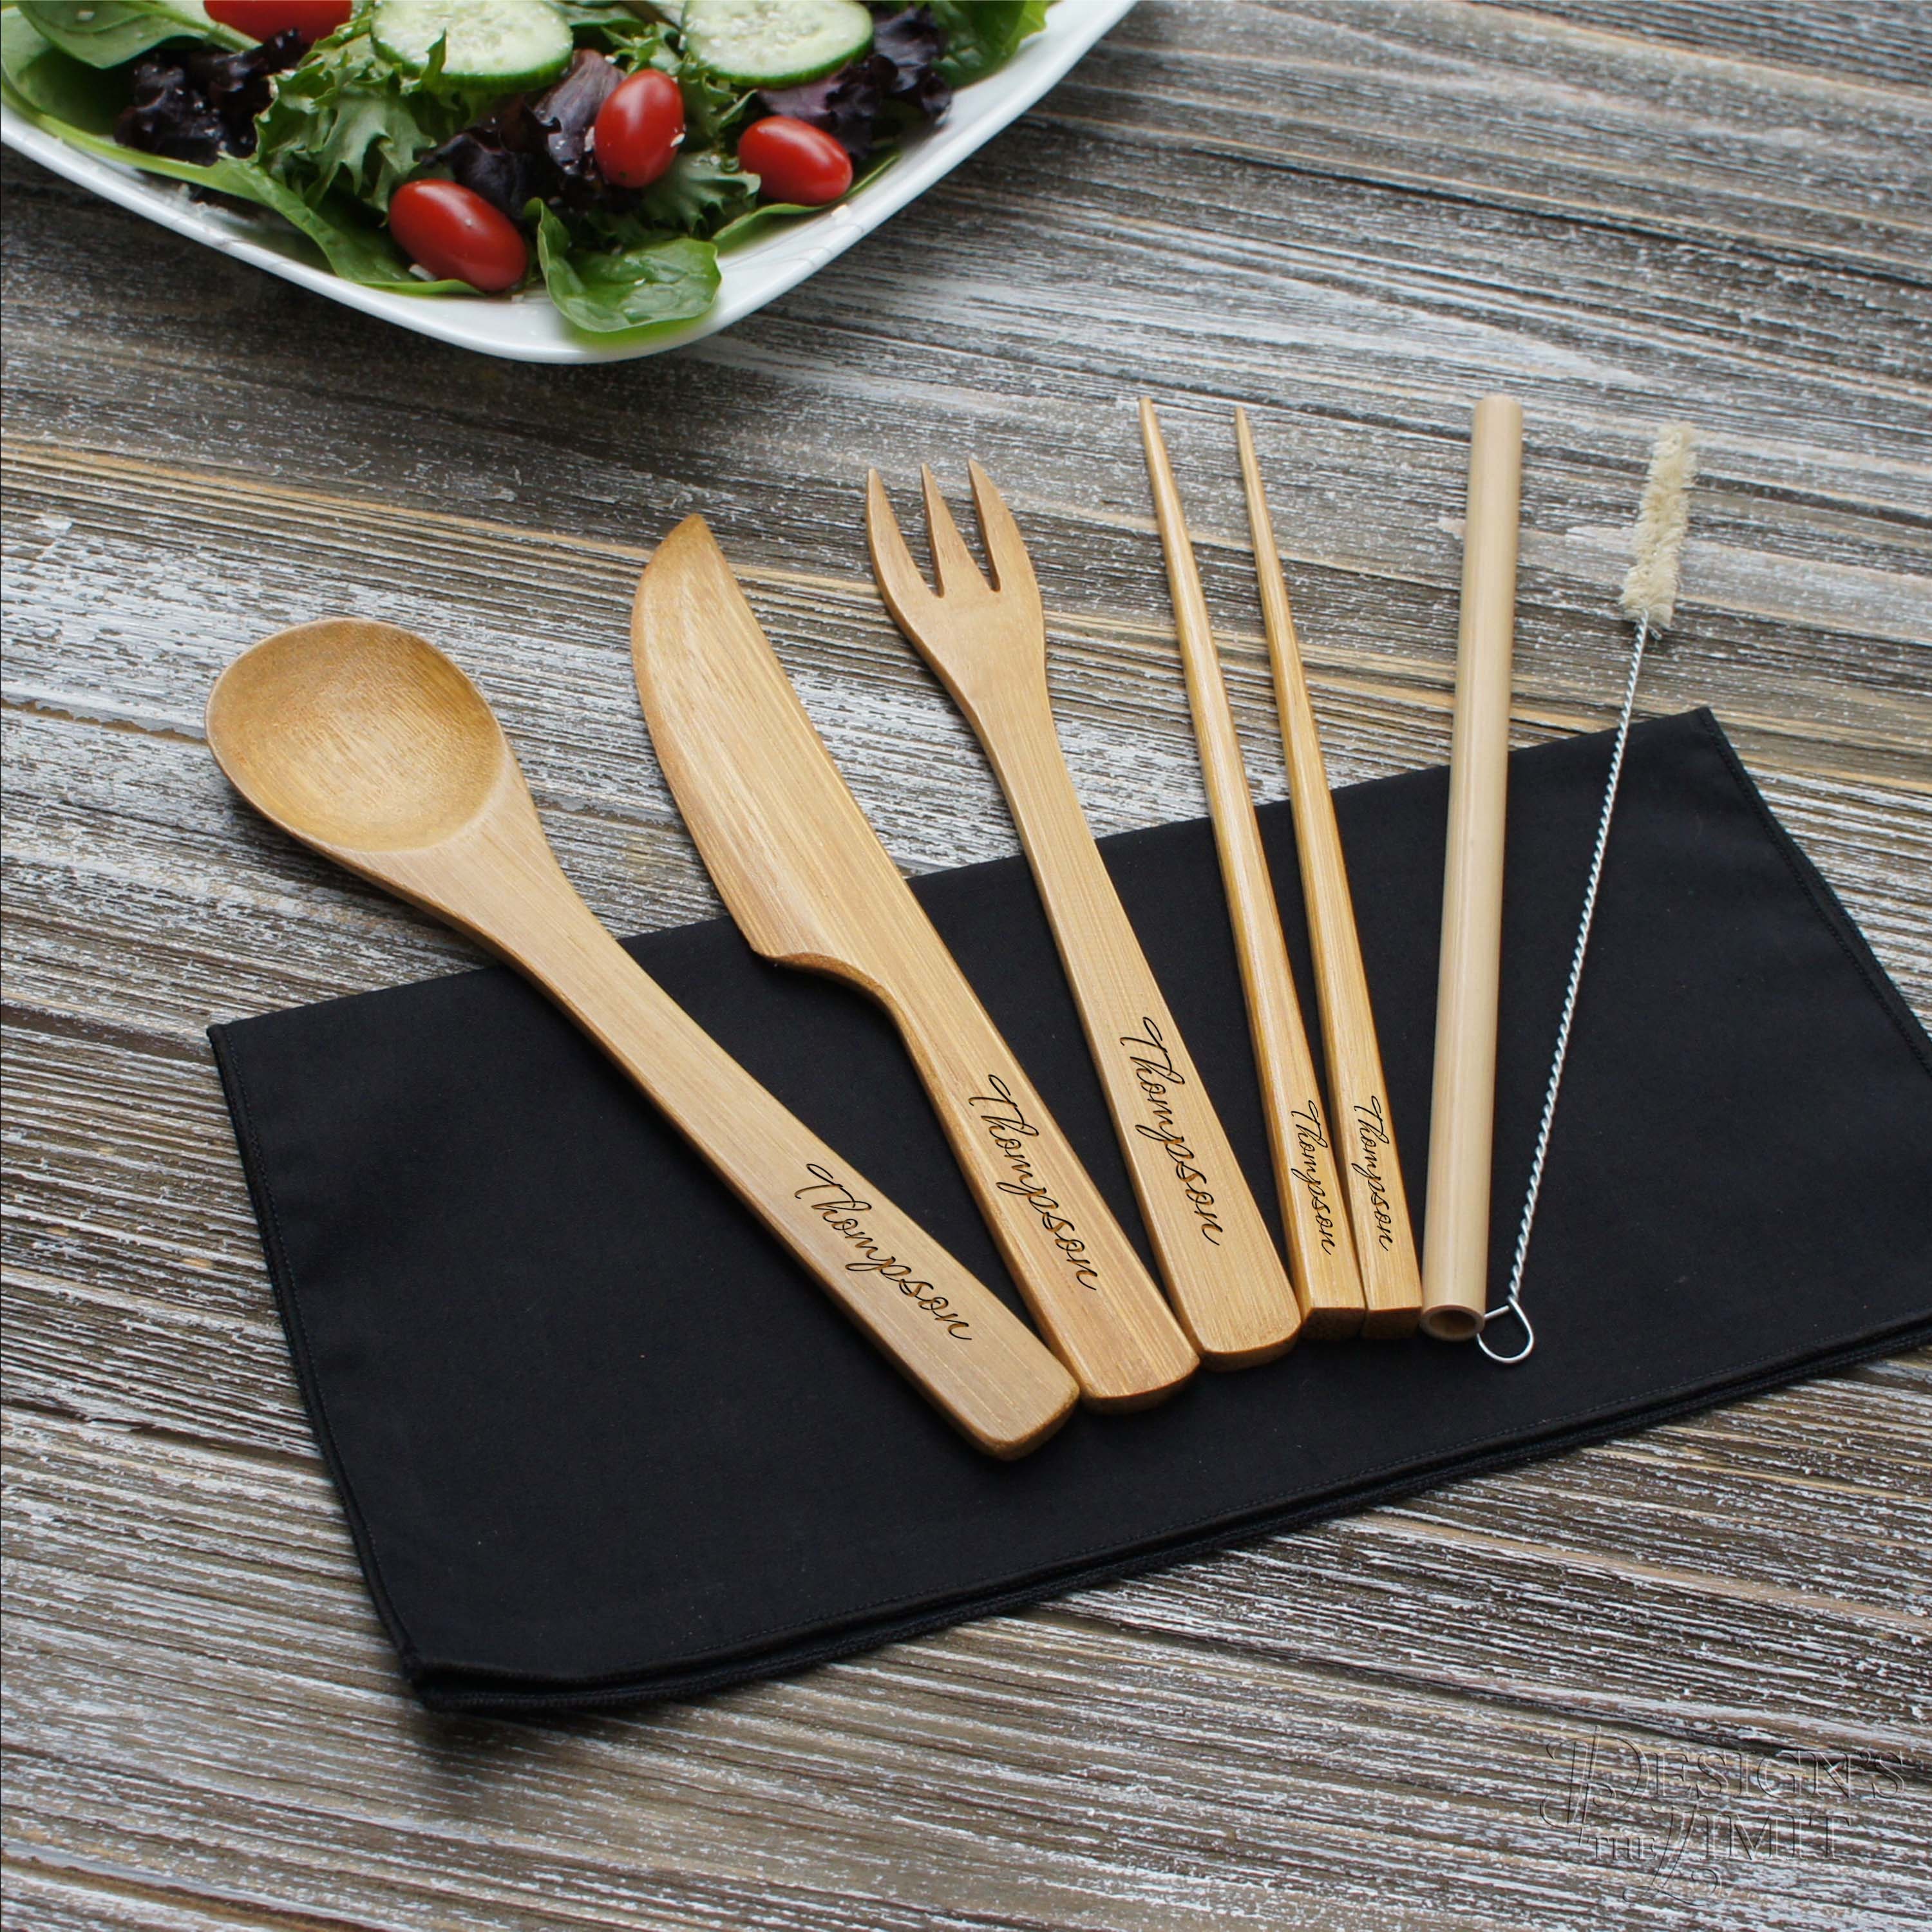 Foldable Spoon With Different Capacities - MoreInspiration